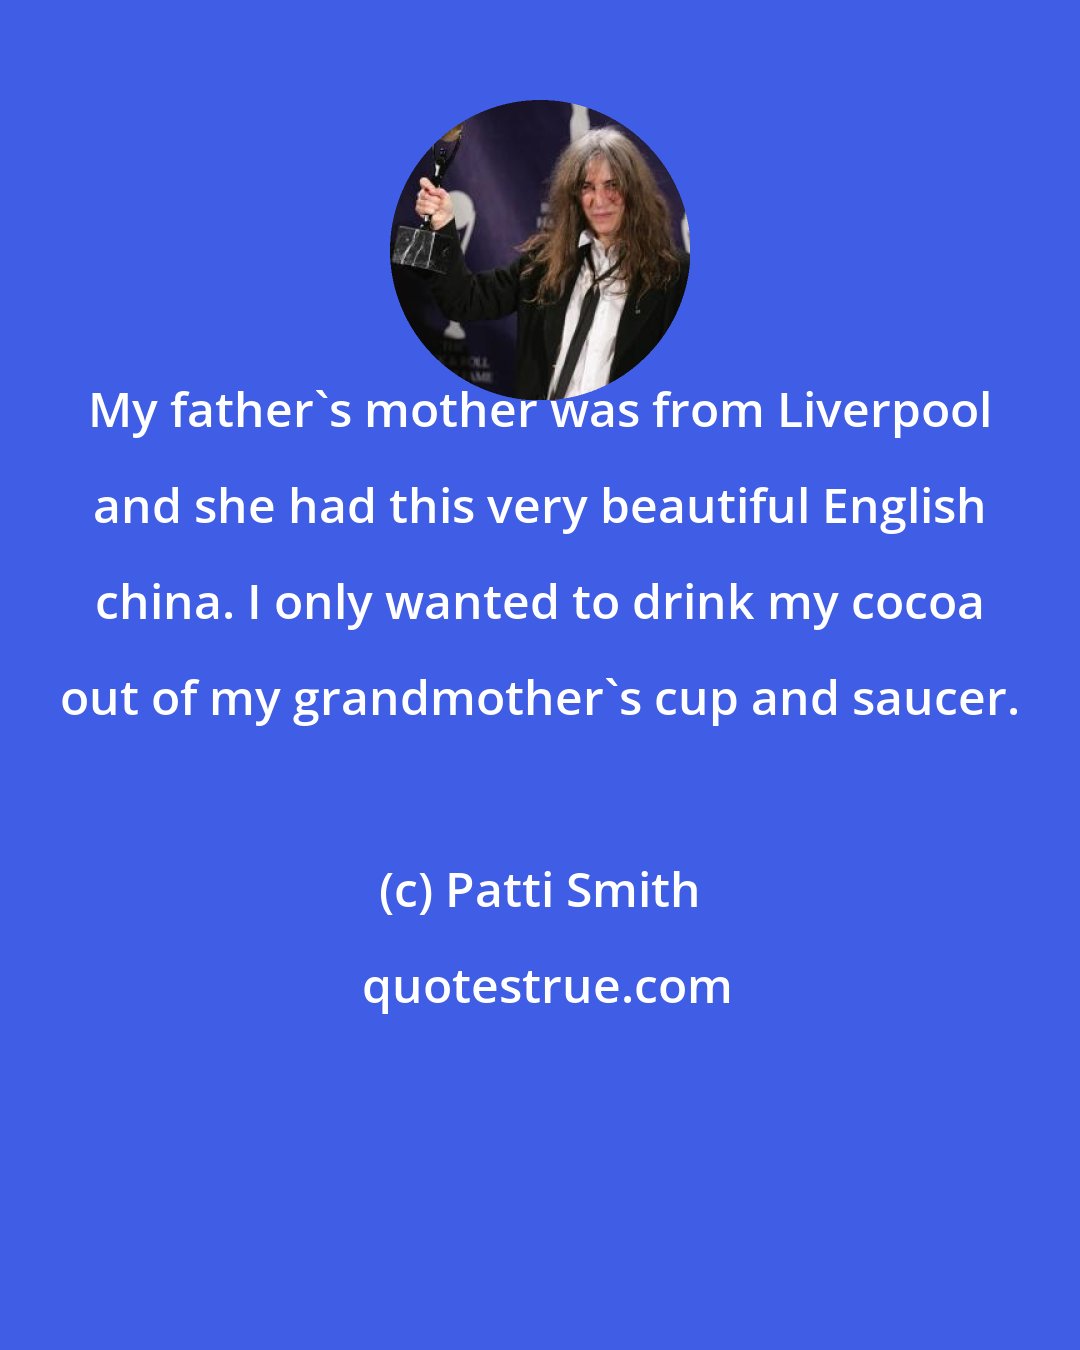 Patti Smith: My father's mother was from Liverpool and she had this very beautiful English china. I only wanted to drink my cocoa out of my grandmother's cup and saucer.